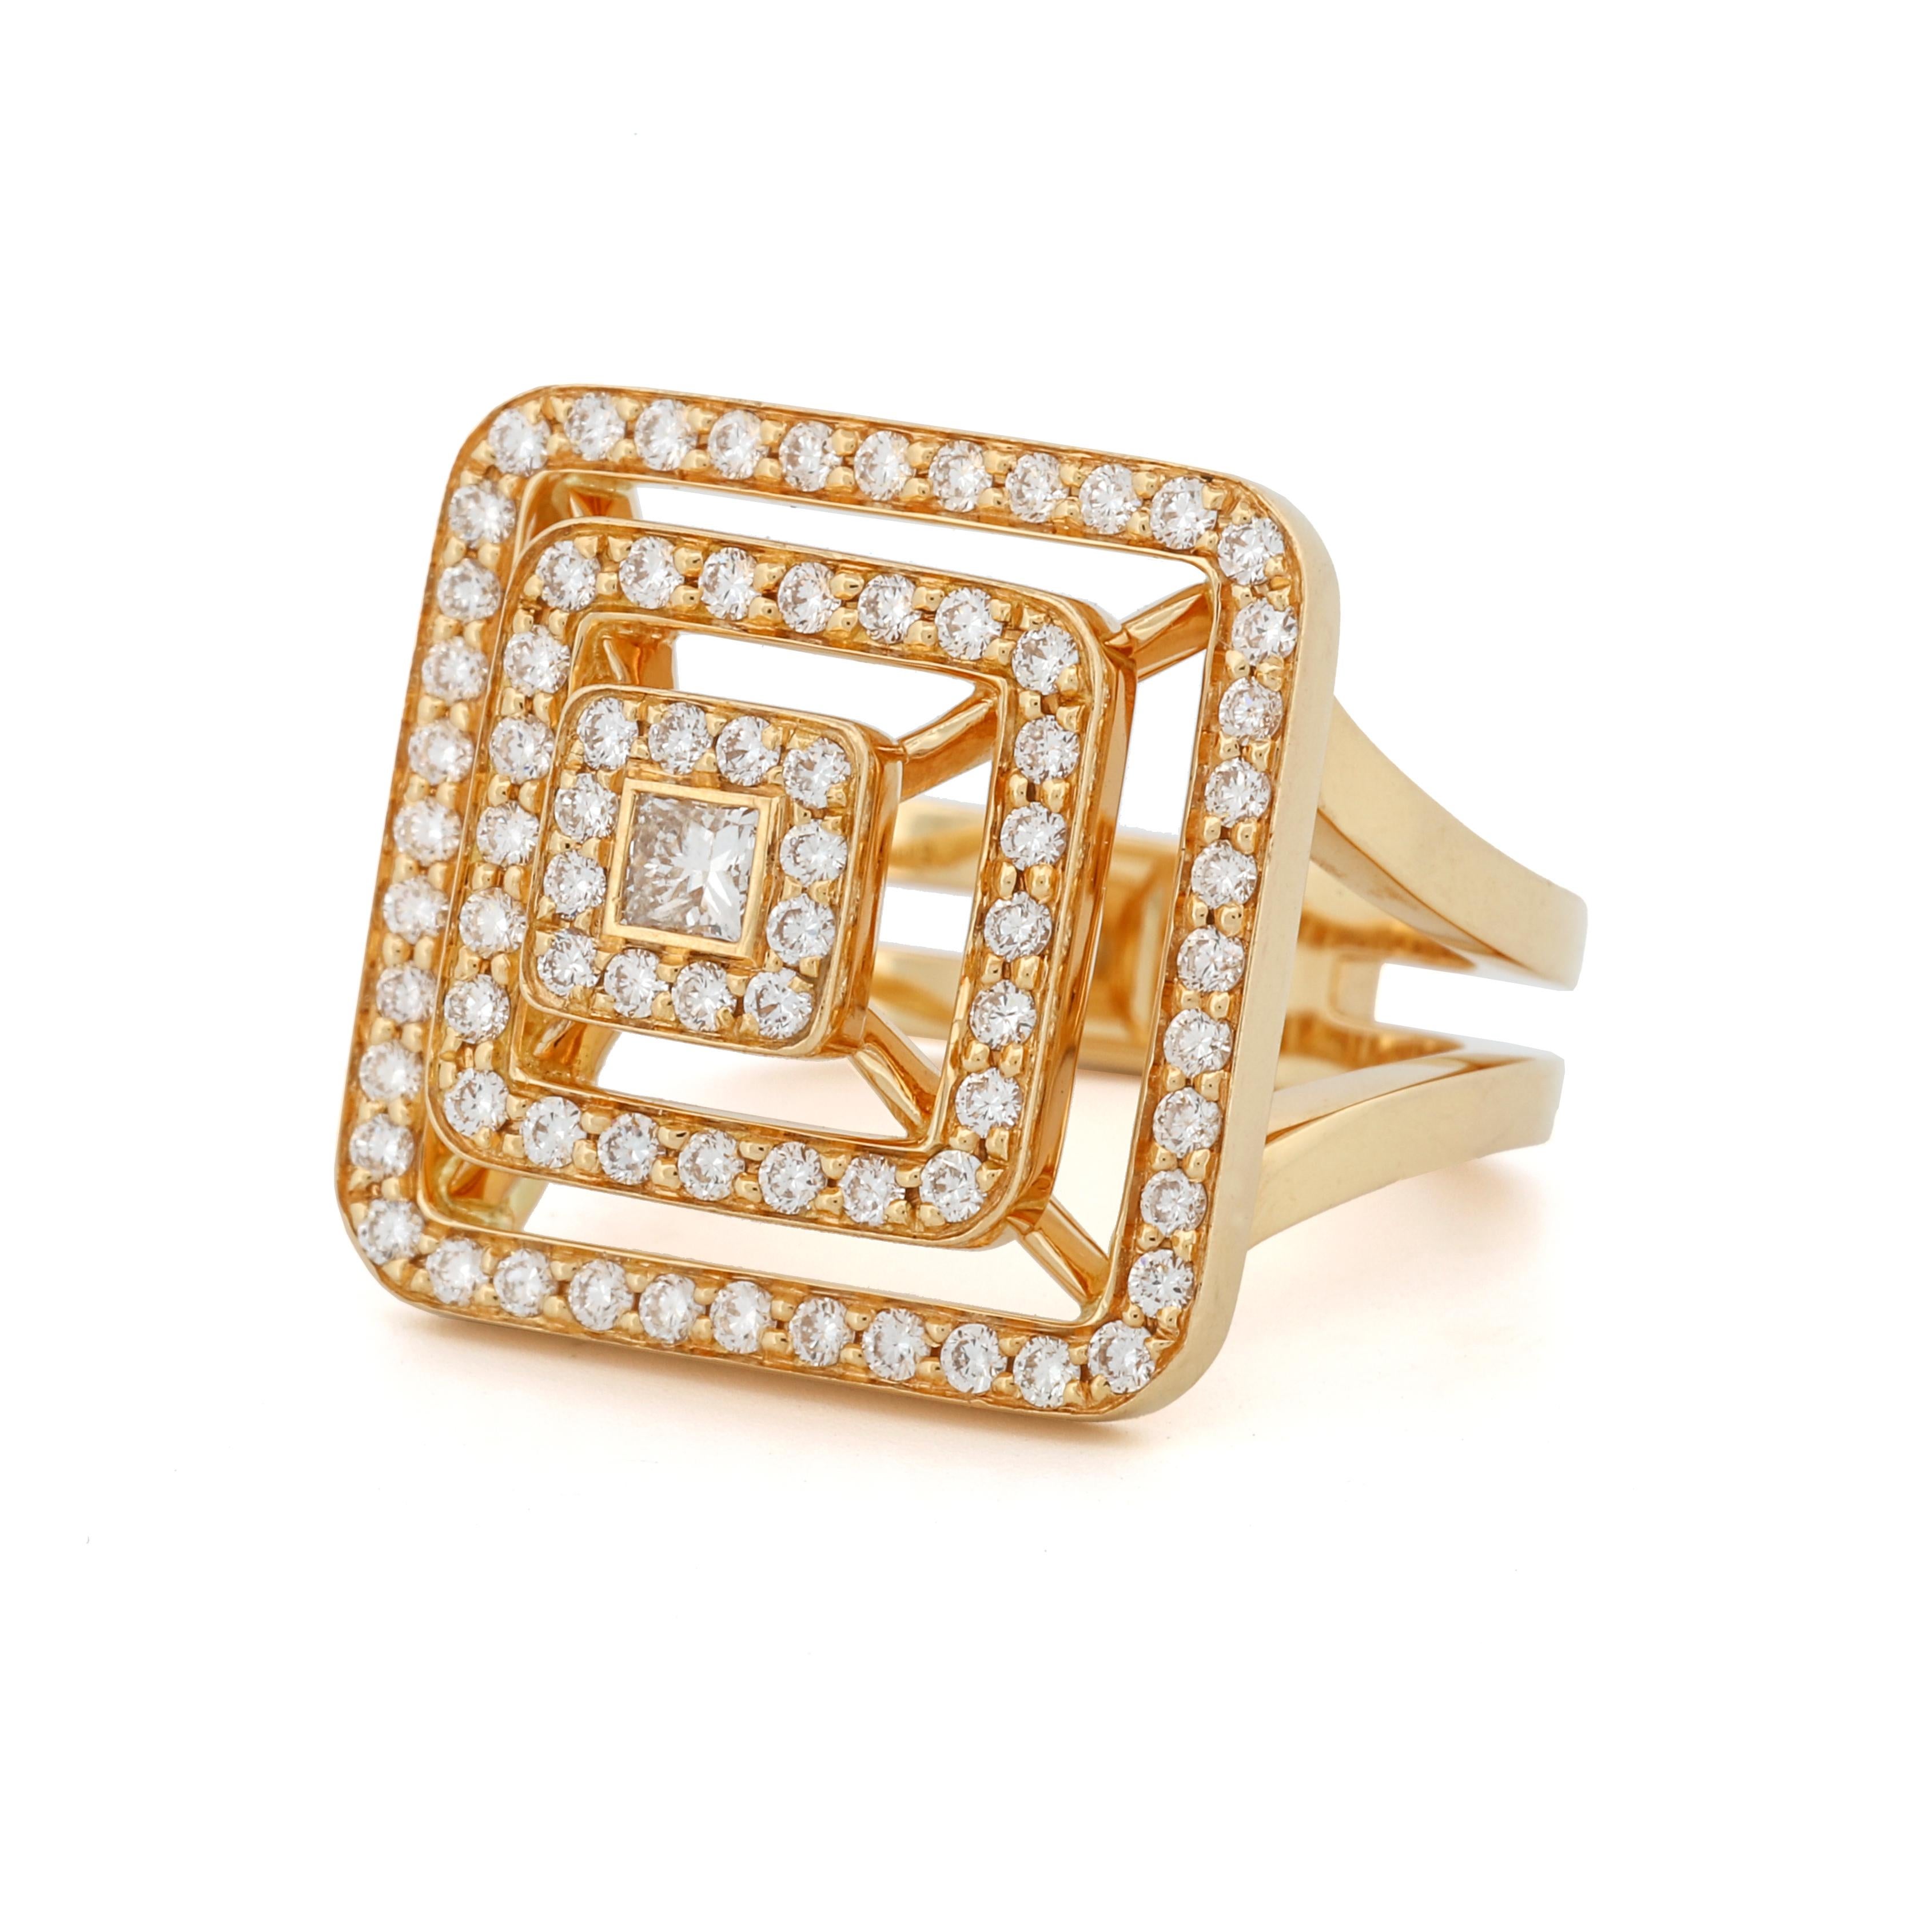 Princess Cut Mimi So Piece Pyramid Diamond Ring in 18k Yellow Gold Size 6.5 For Sale